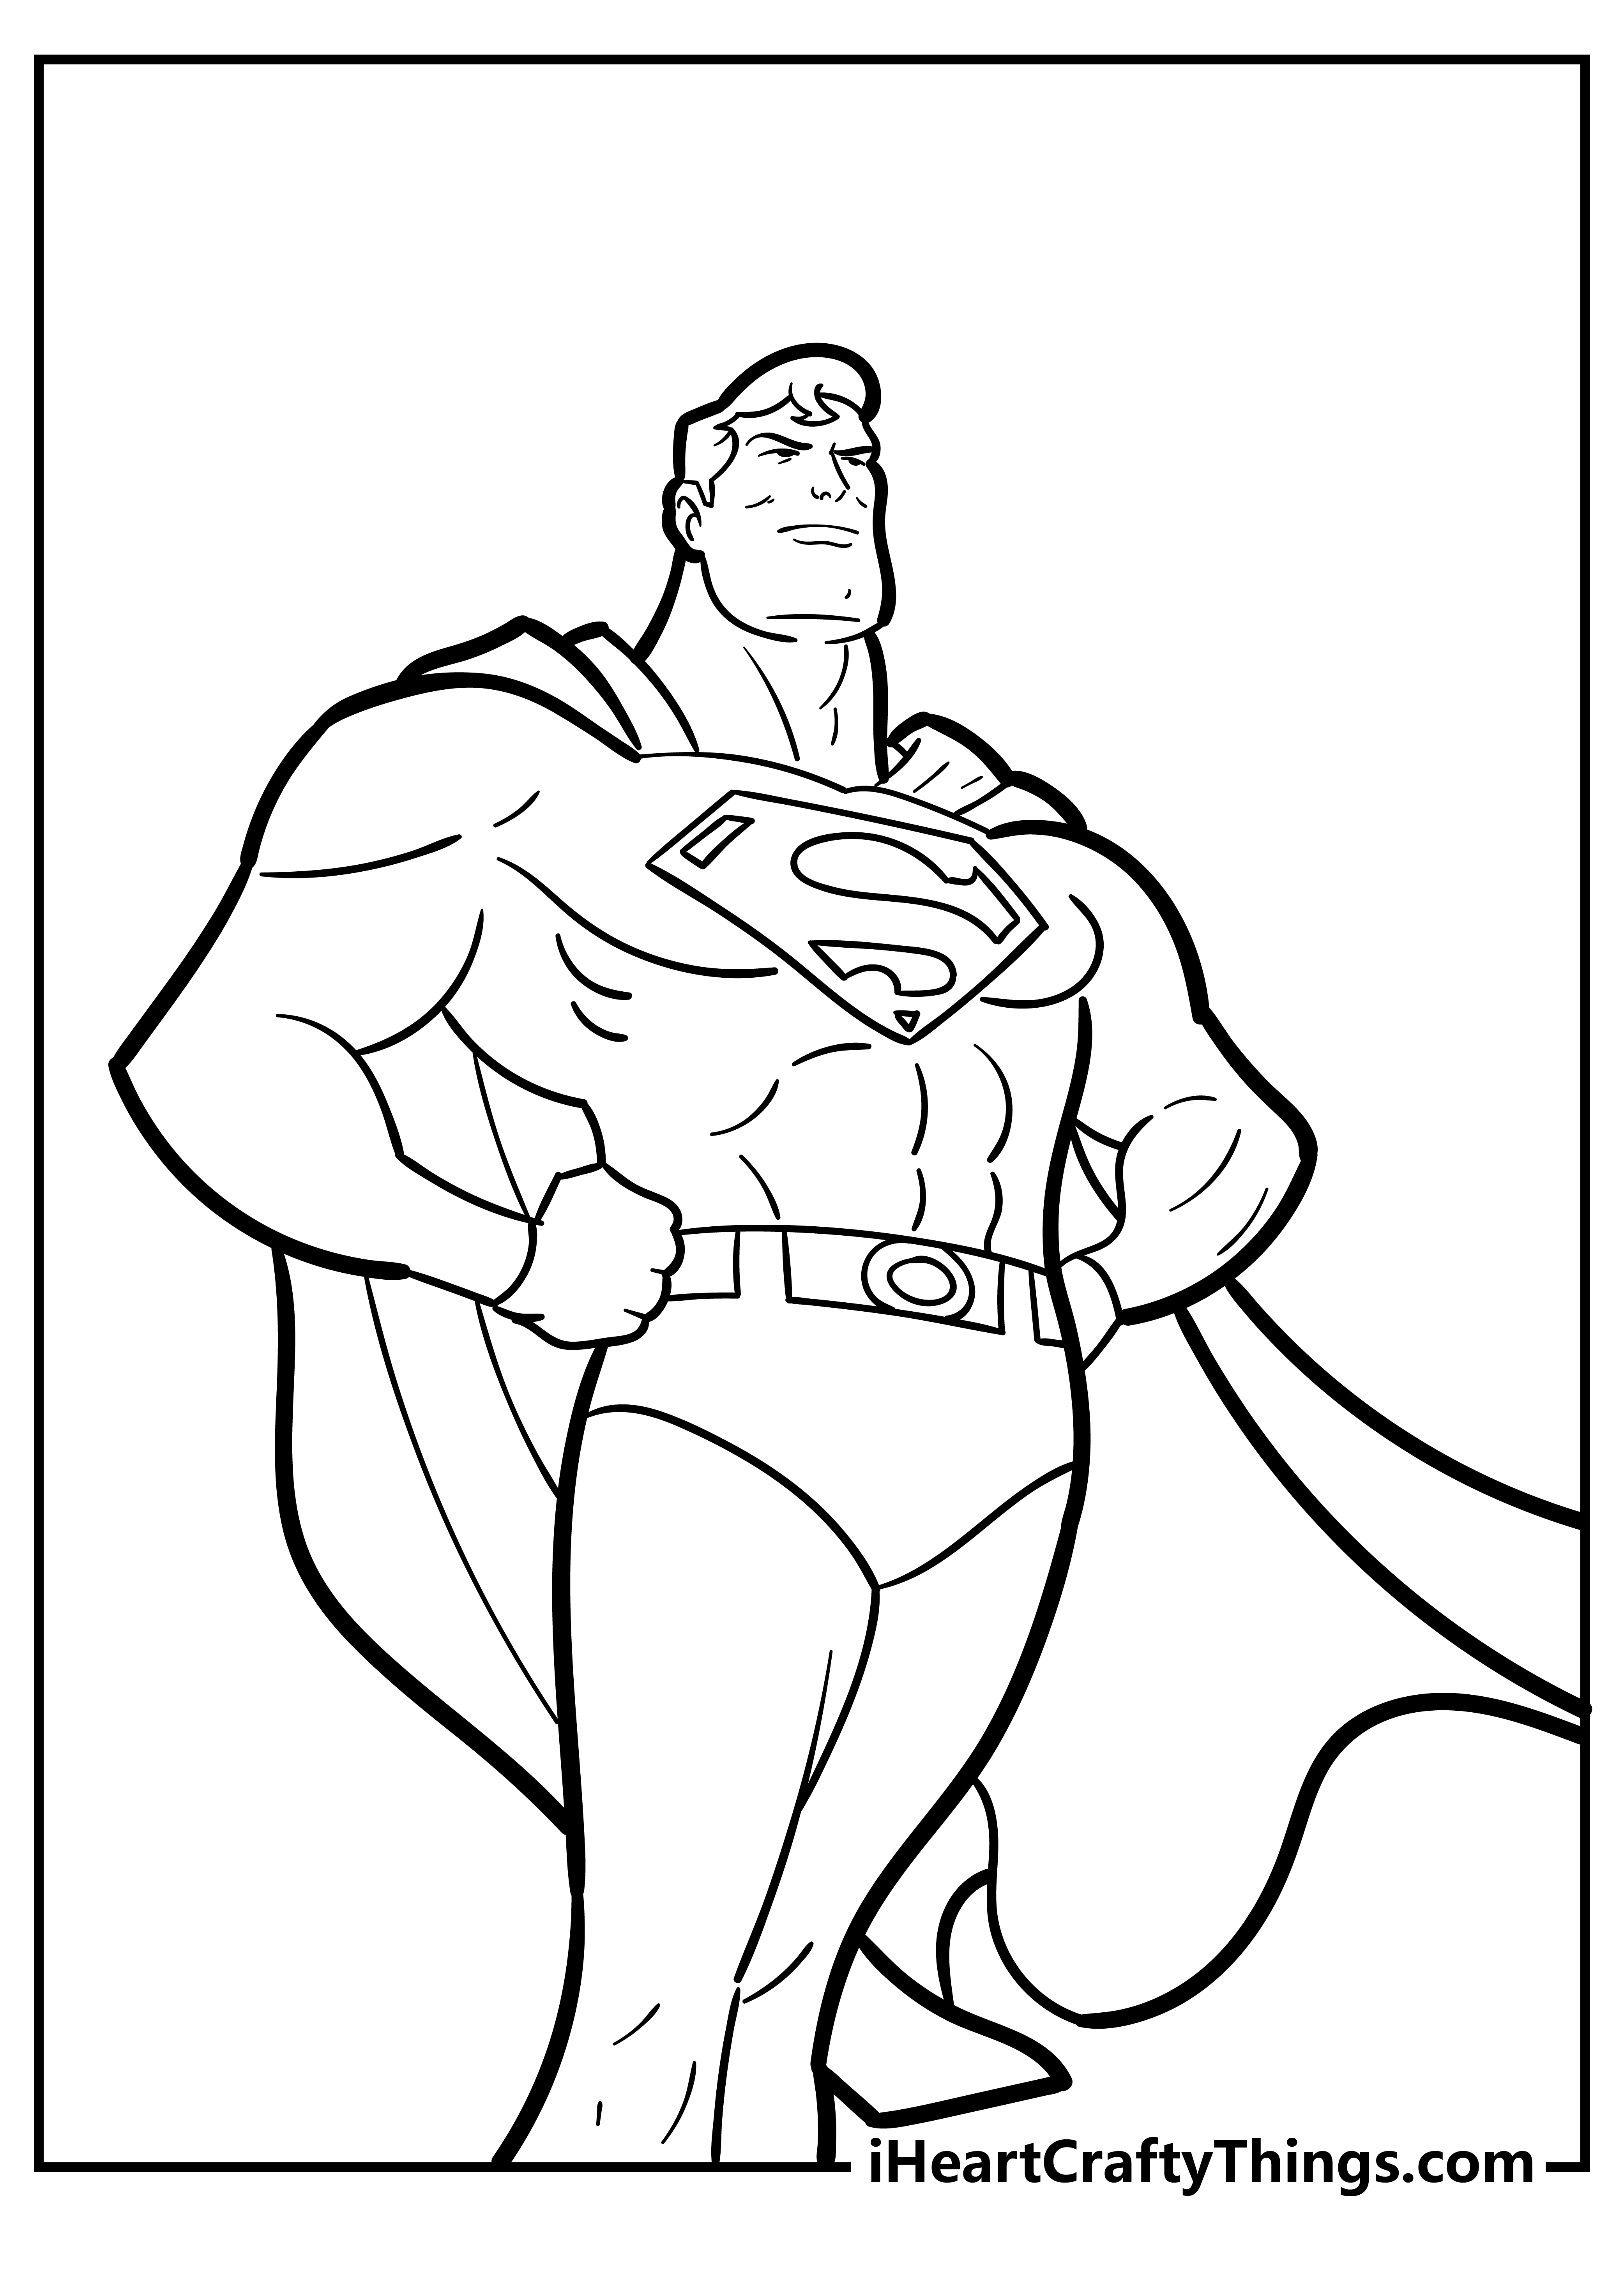 Superman Coloring Pages for preschoolers free printable